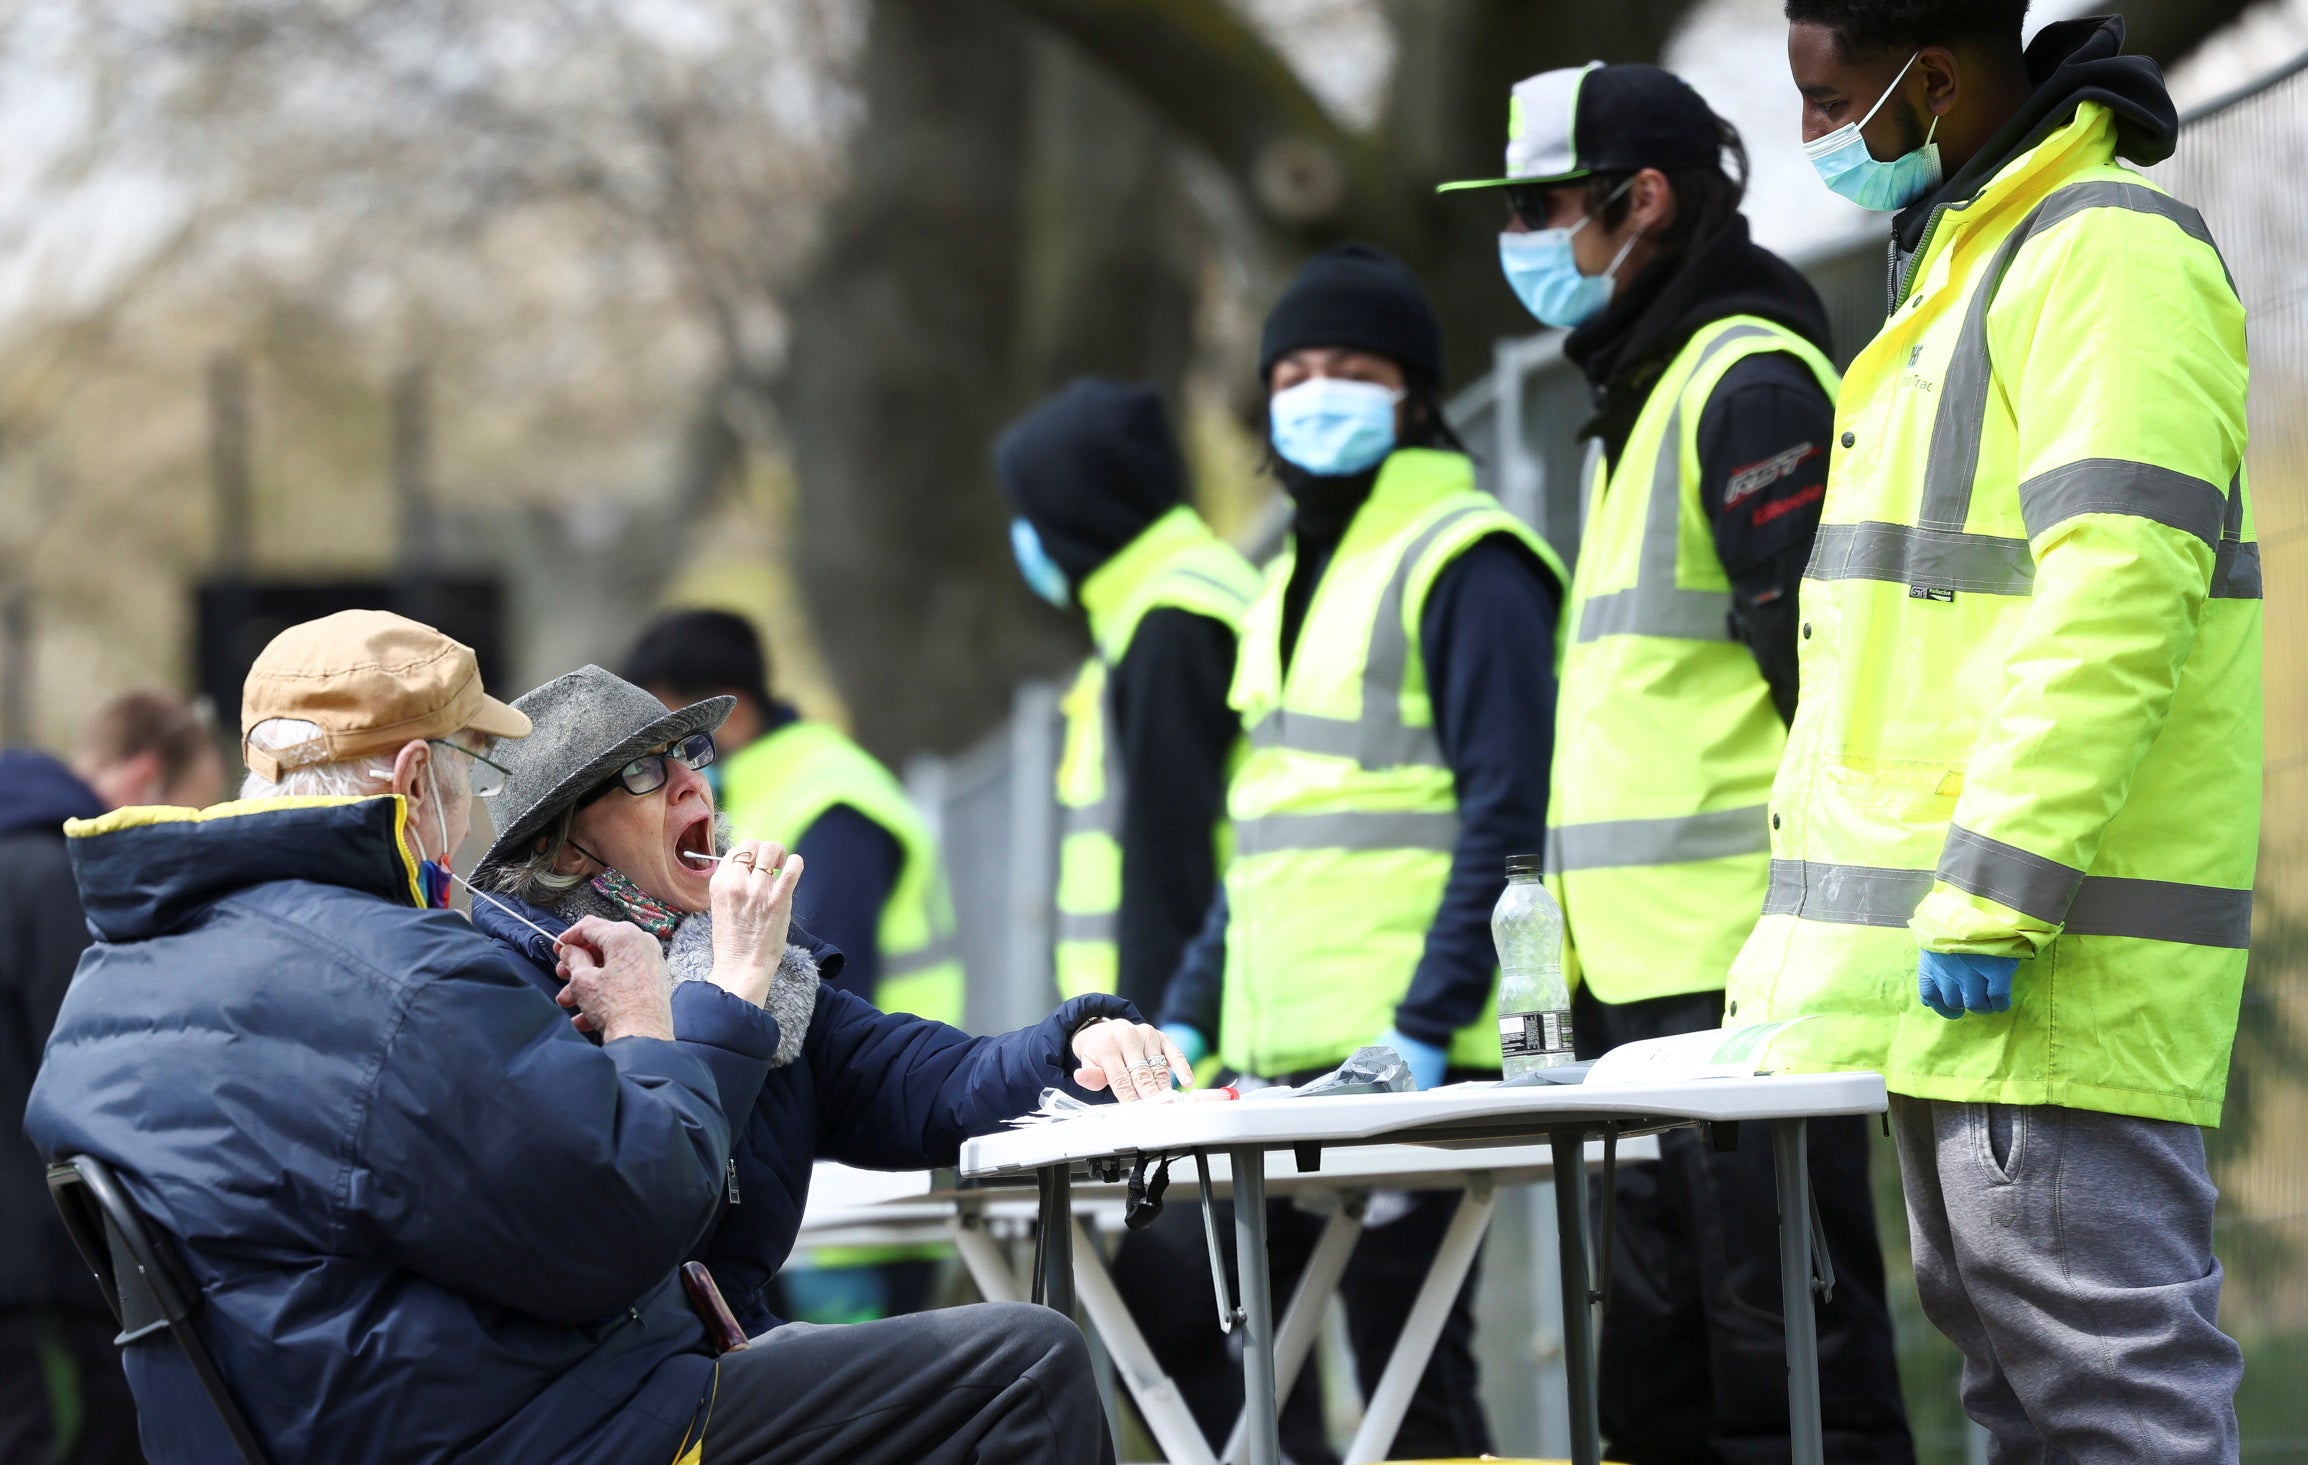 People swab themselves at a Covid-19 testing site on Clapham Common in south London